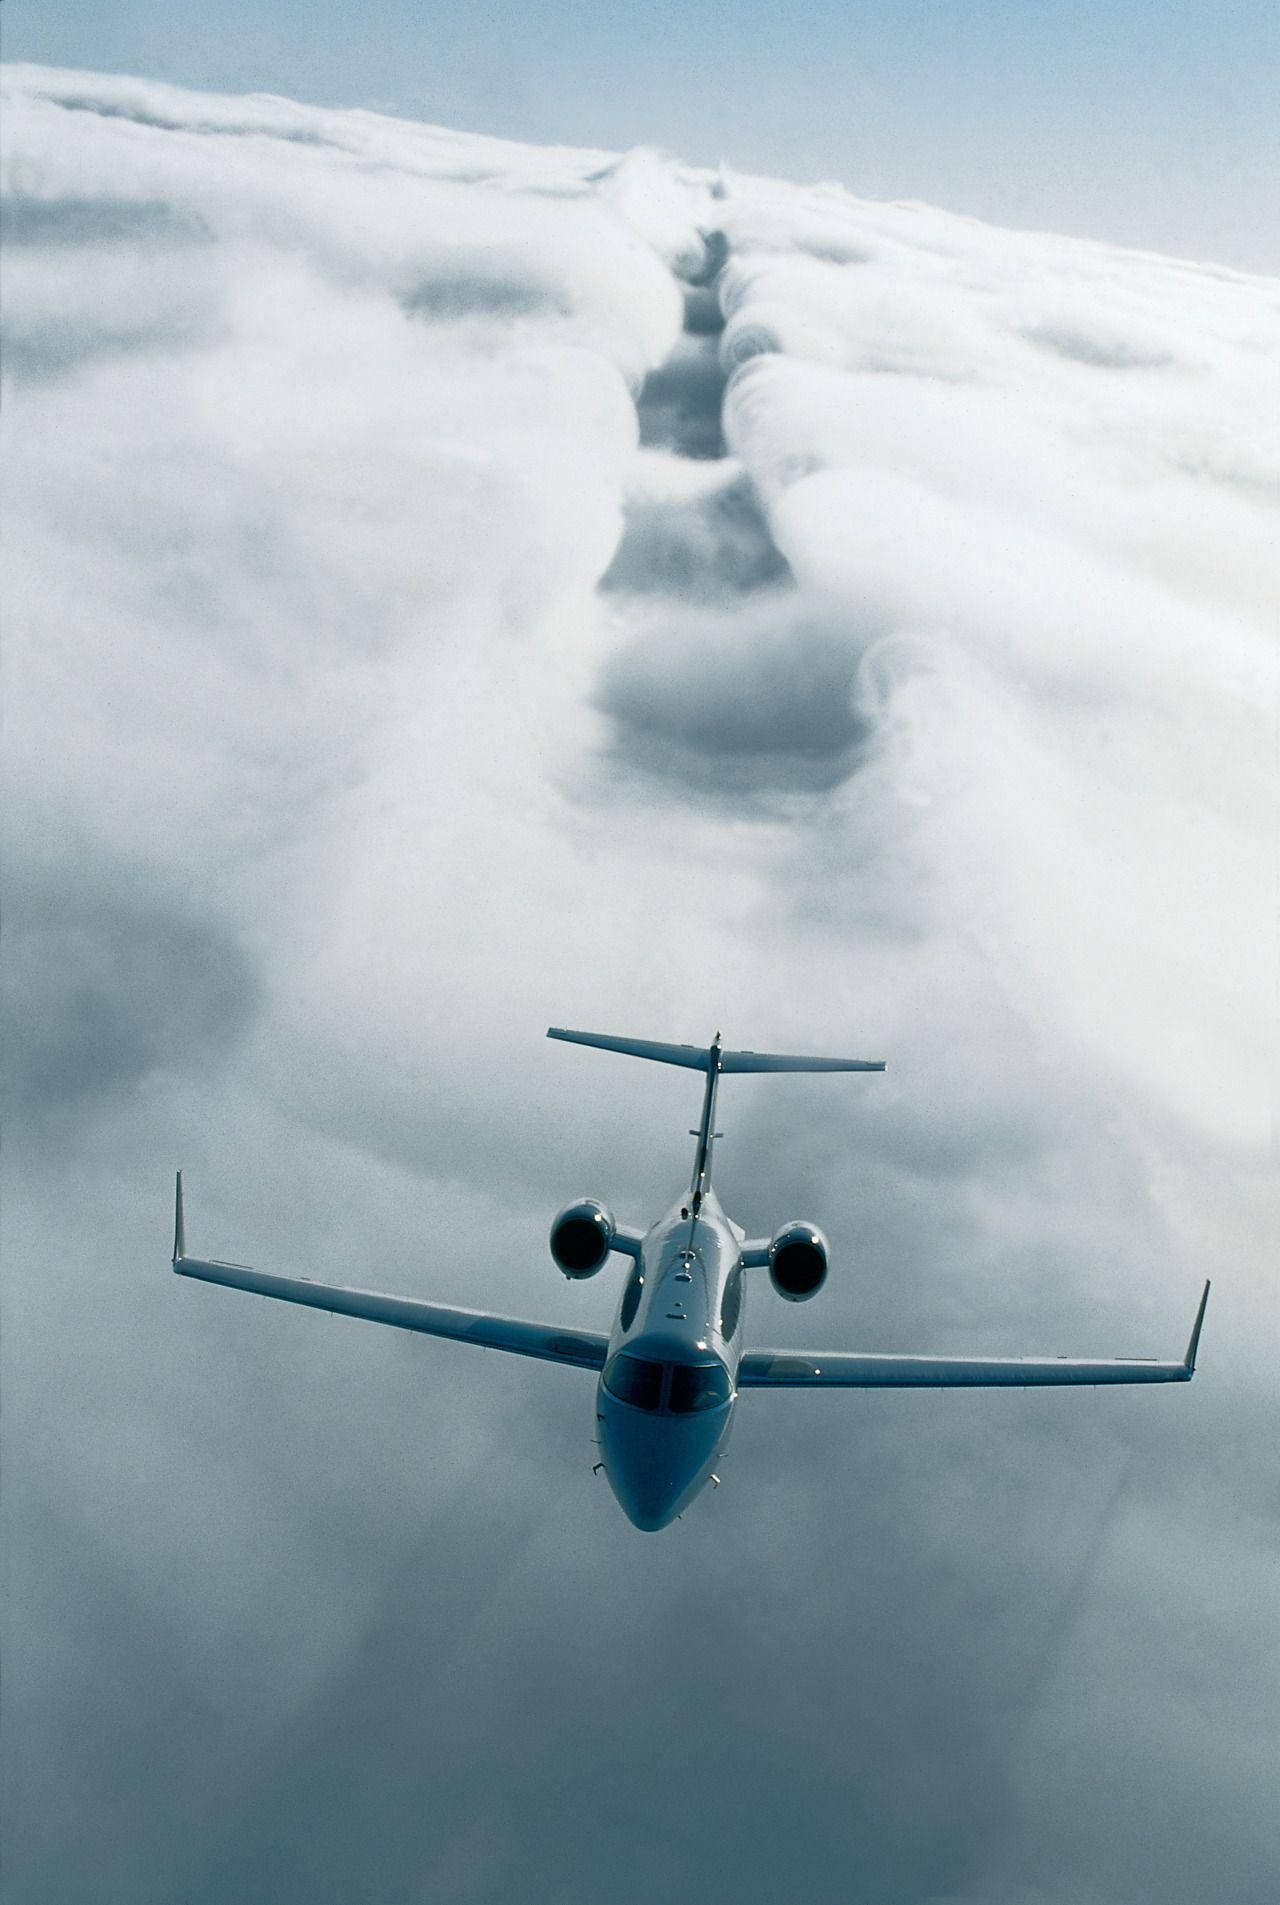 Thick Clouds And Jet Iphone Wallpaper